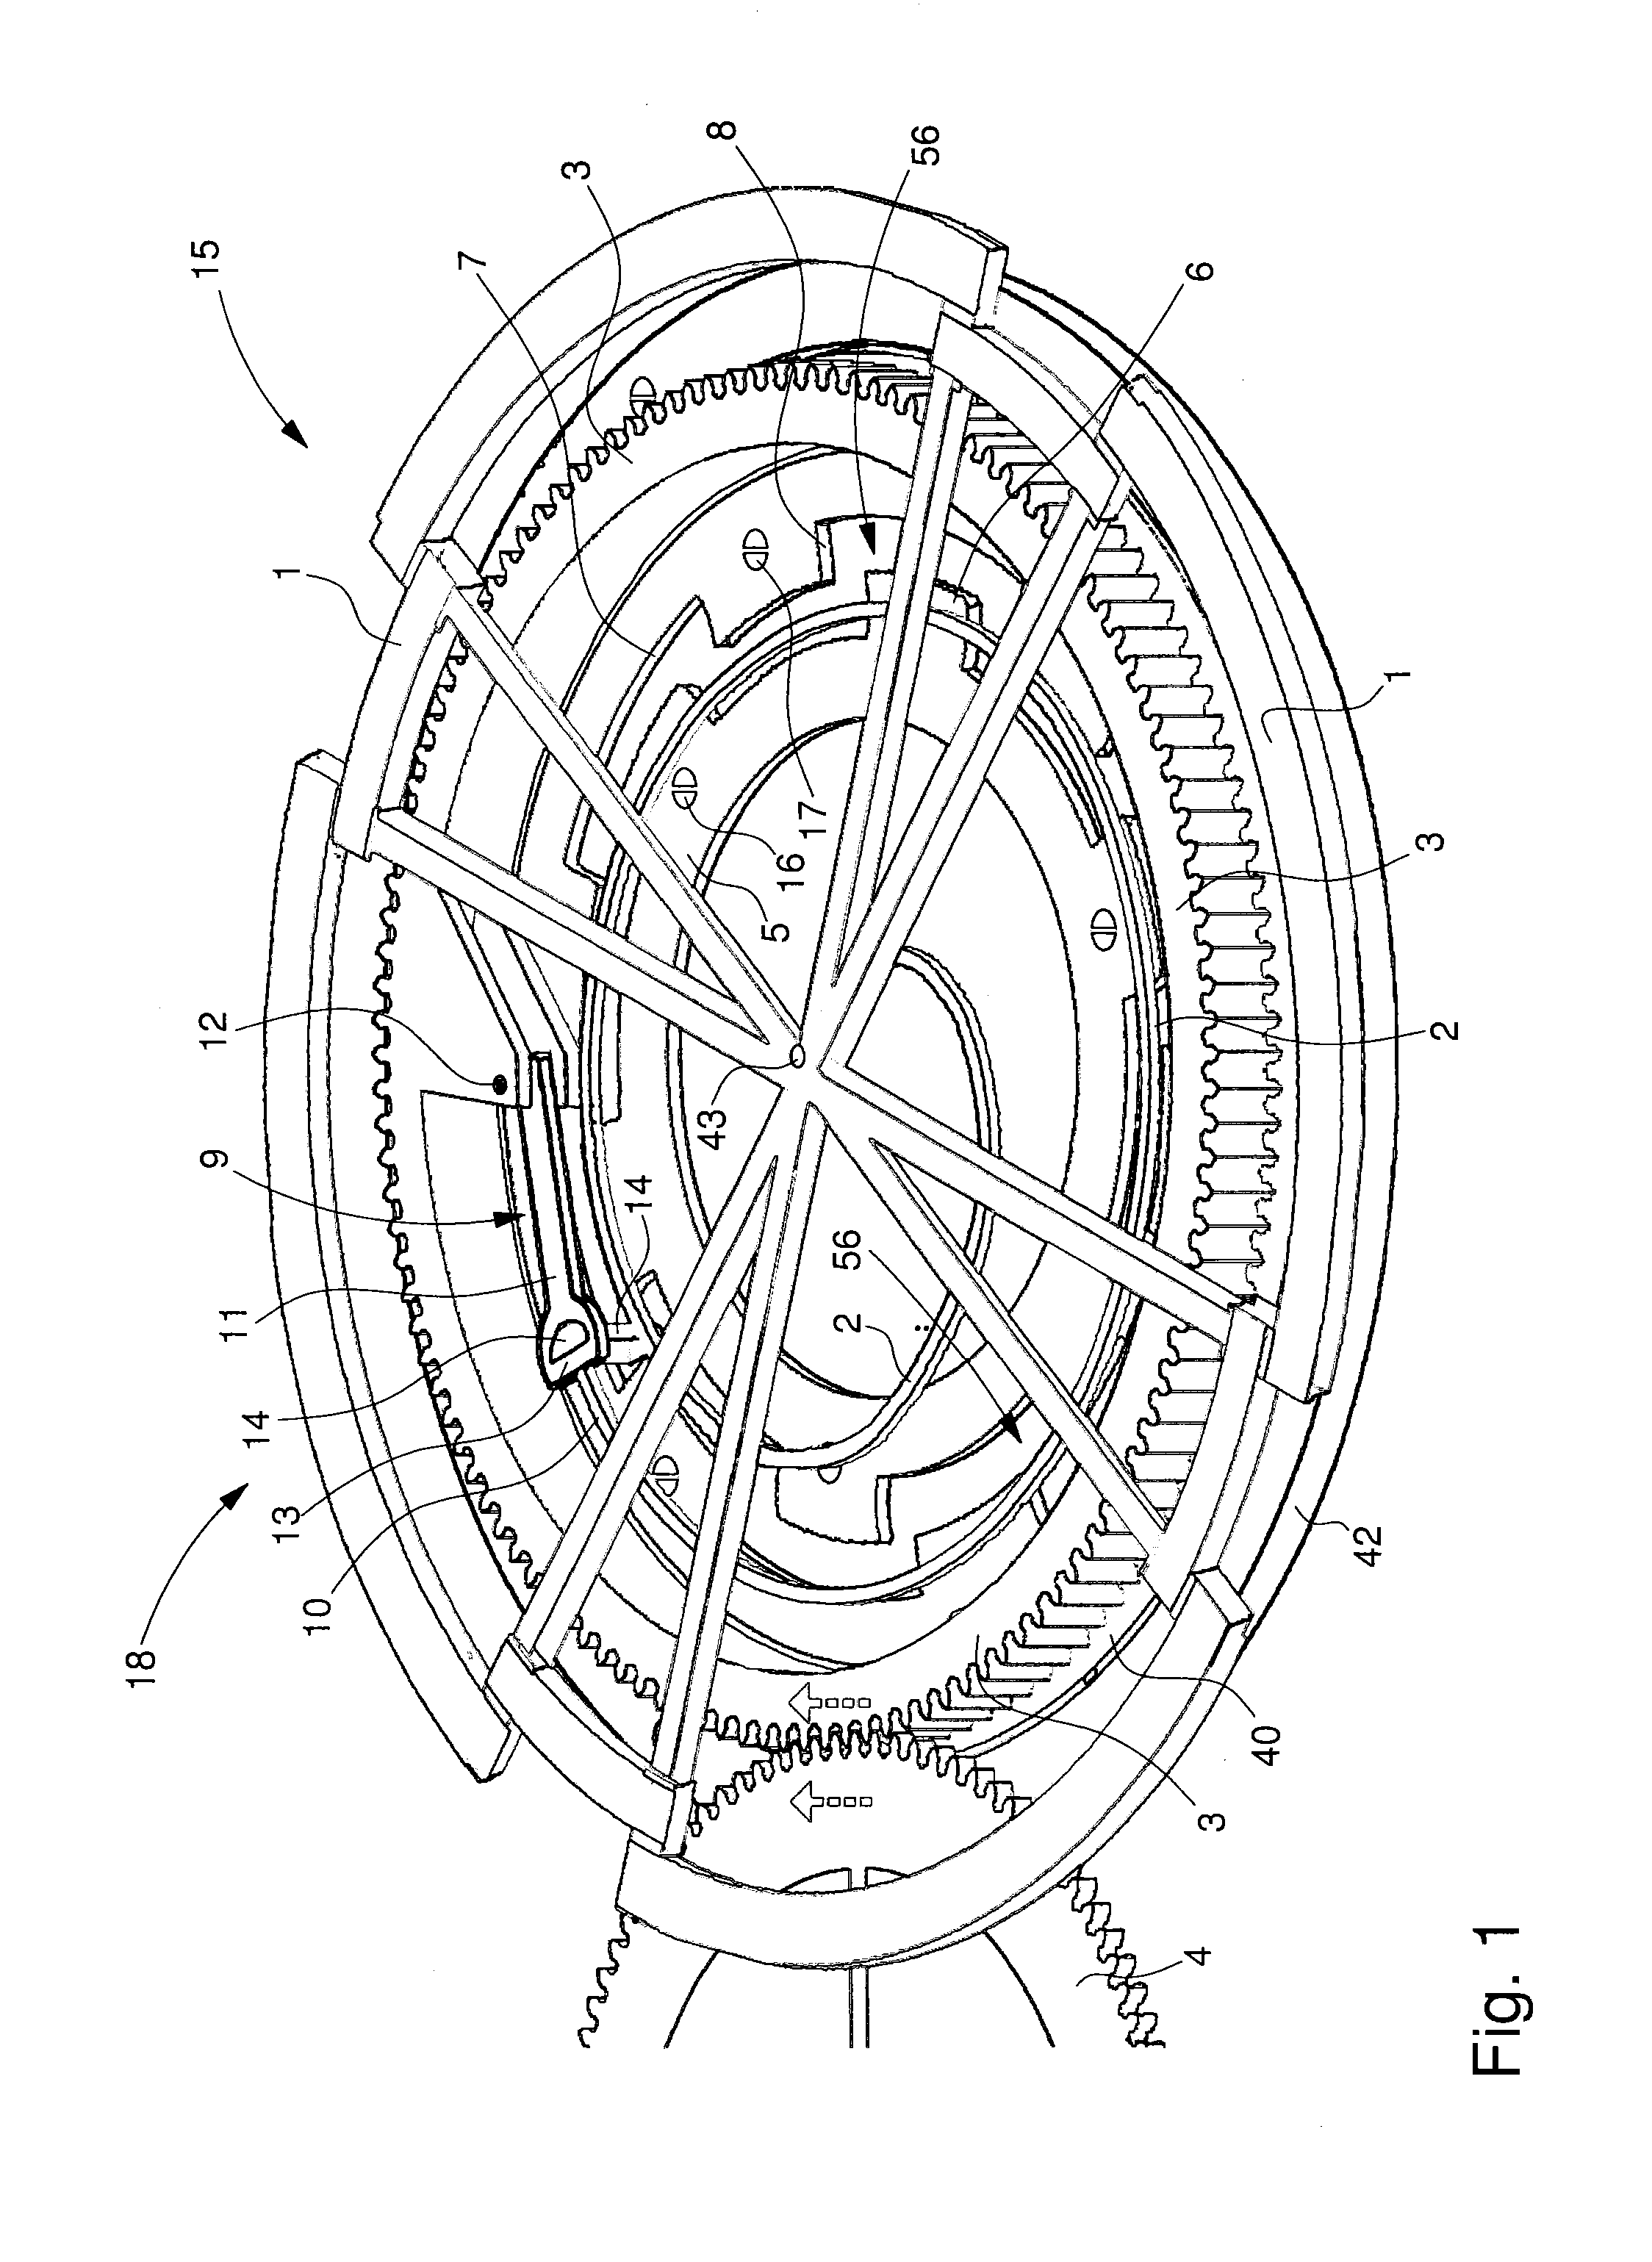 Escapement system for a sprung balance resonator